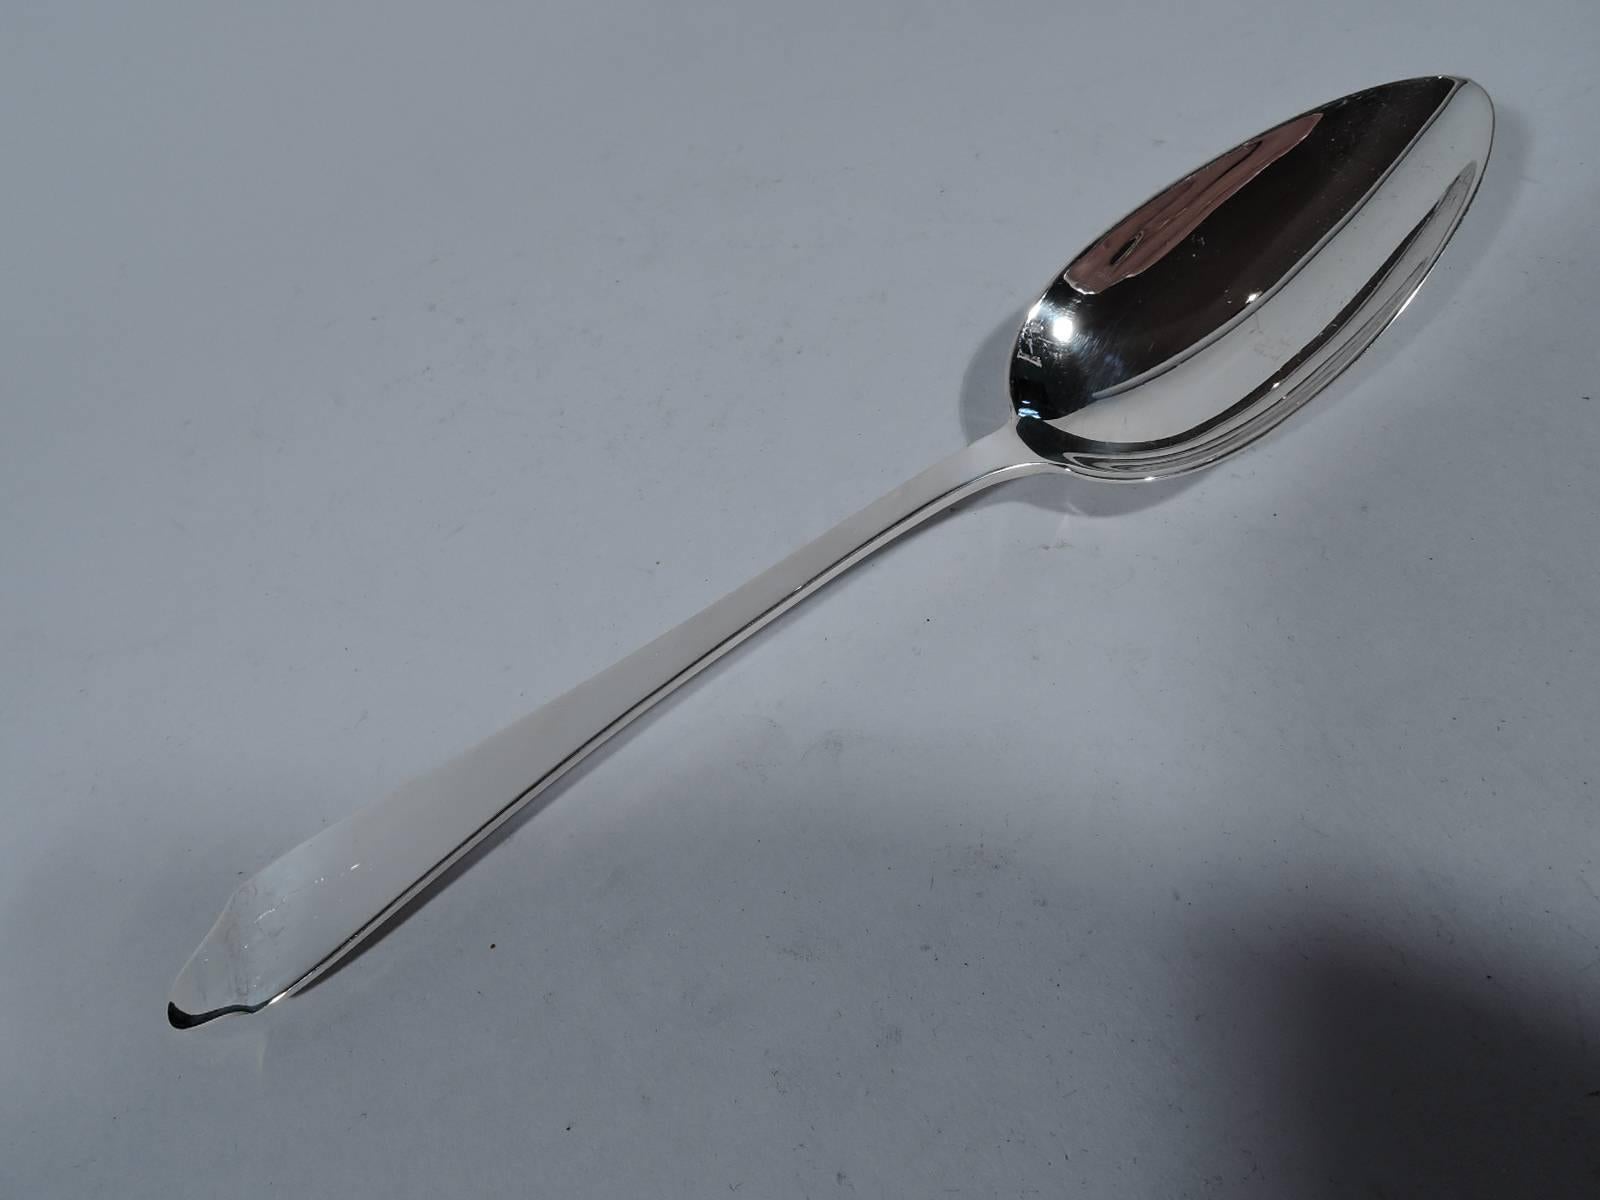 Pair of sterling silver serving spoon and fork in Clinton pattern. Made by Tiffany & Co. in New York. Two fine pieces in a distinctive pattern that works with both Colonial Revival and Art Deco table settings. The pattern was first produced in